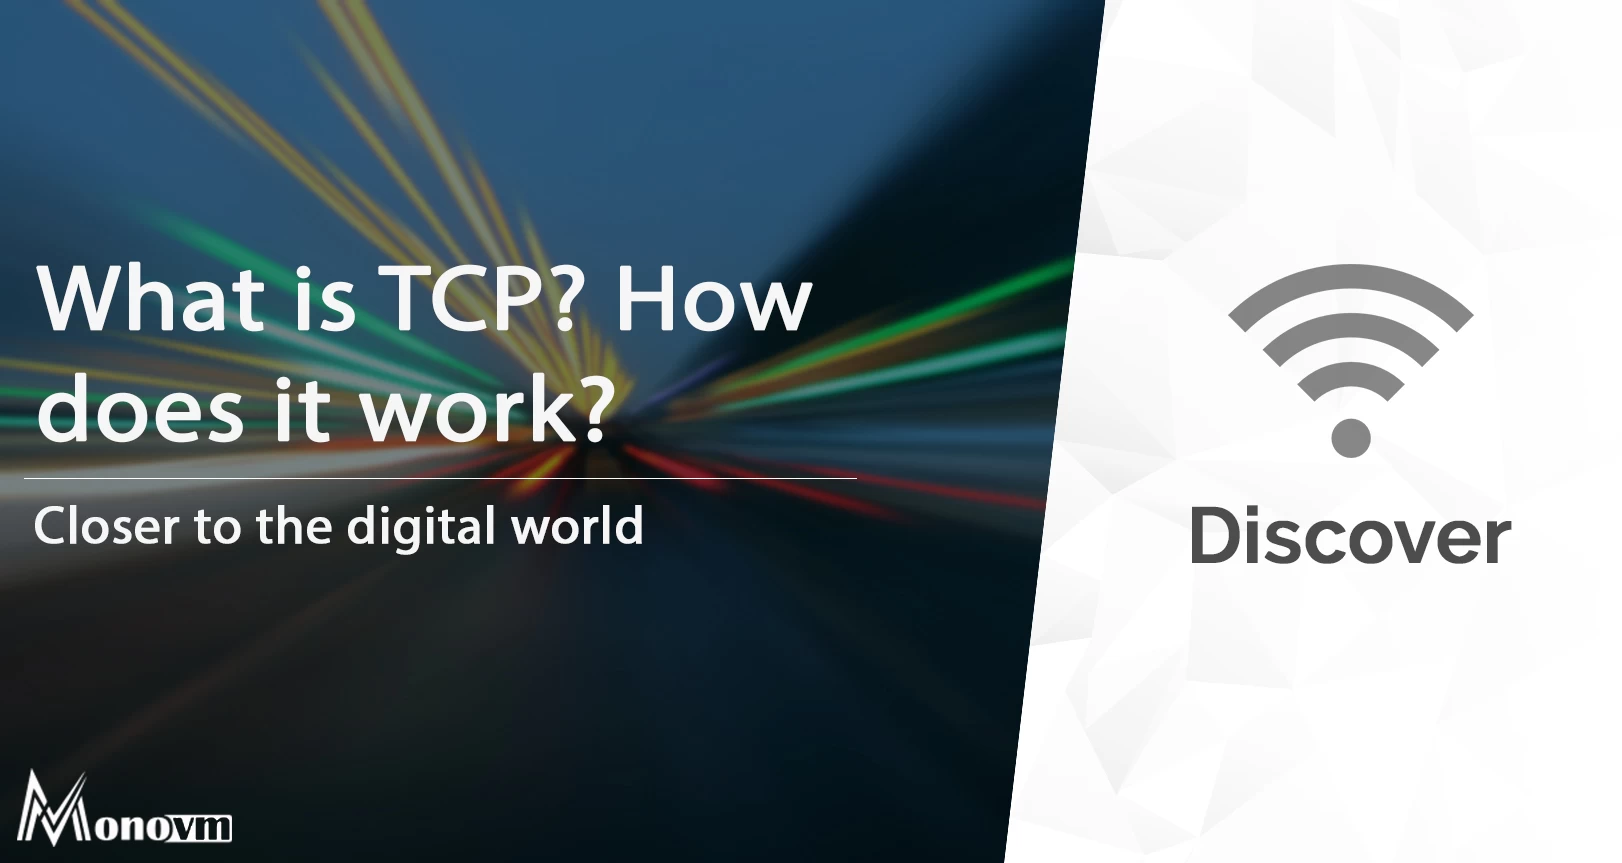 What is TCP Protocol? What is TCP Full Form?